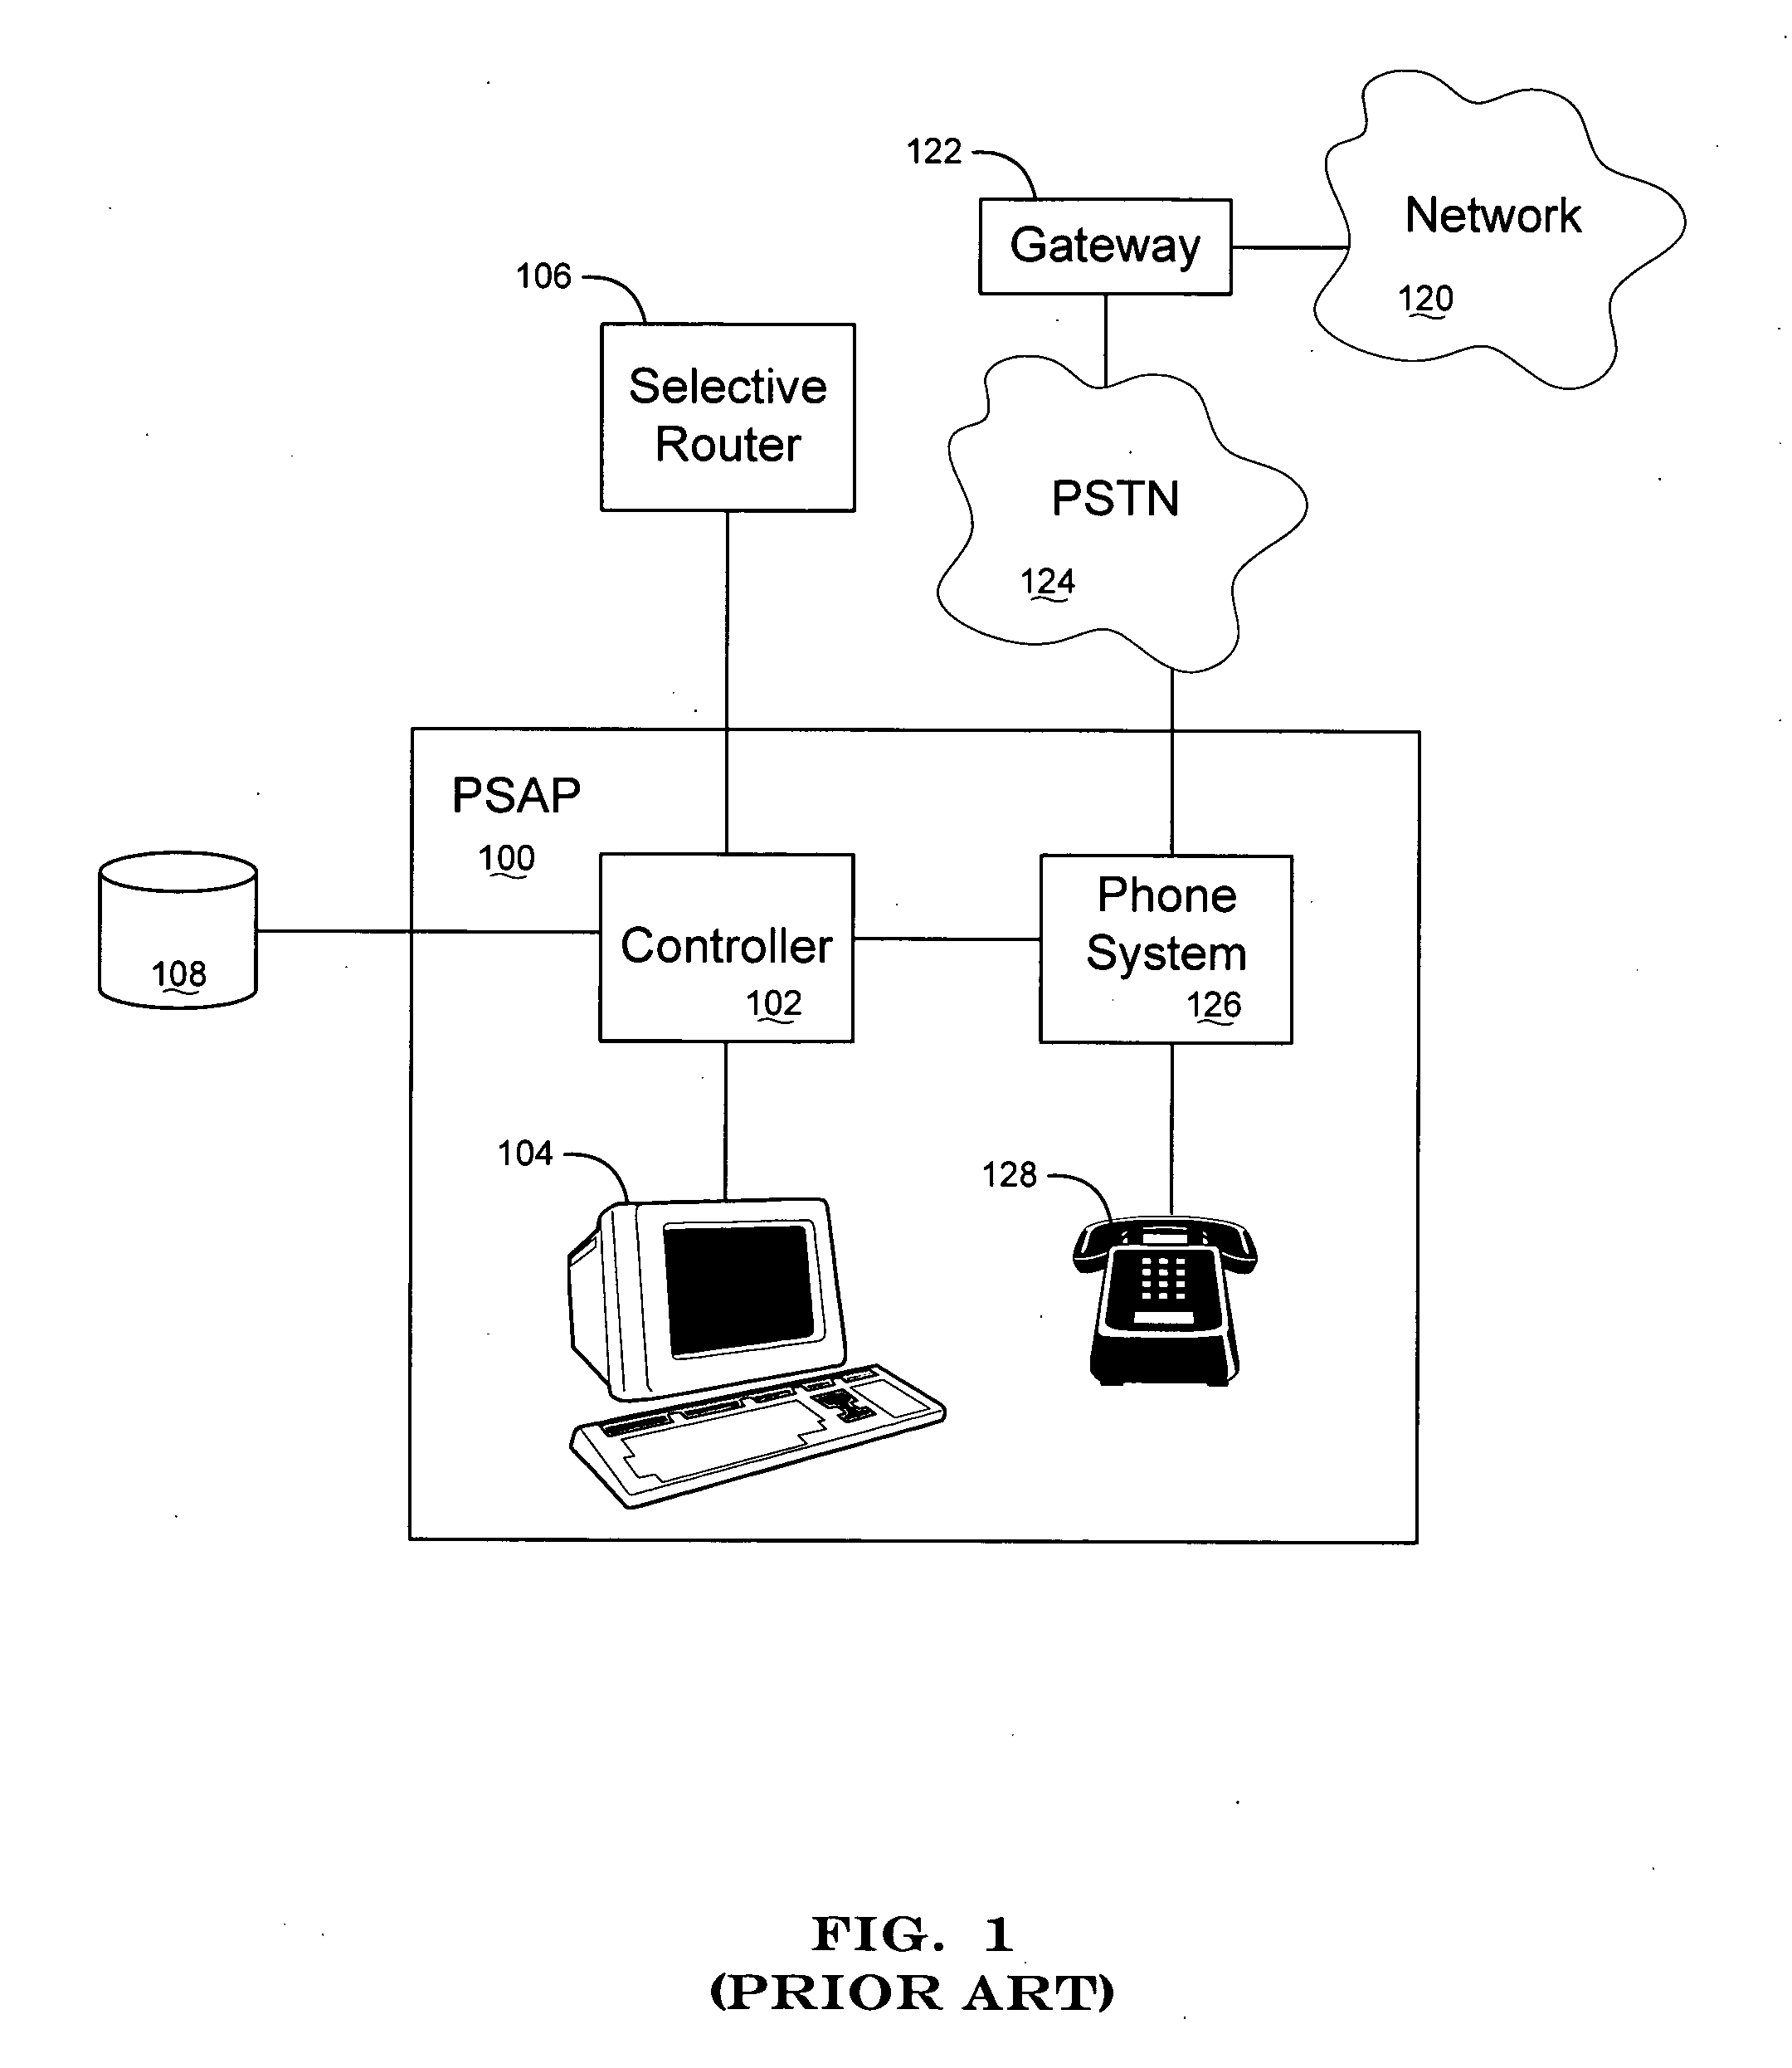 Apparatus and method for interfacing packet-based phone services with emergency call centers